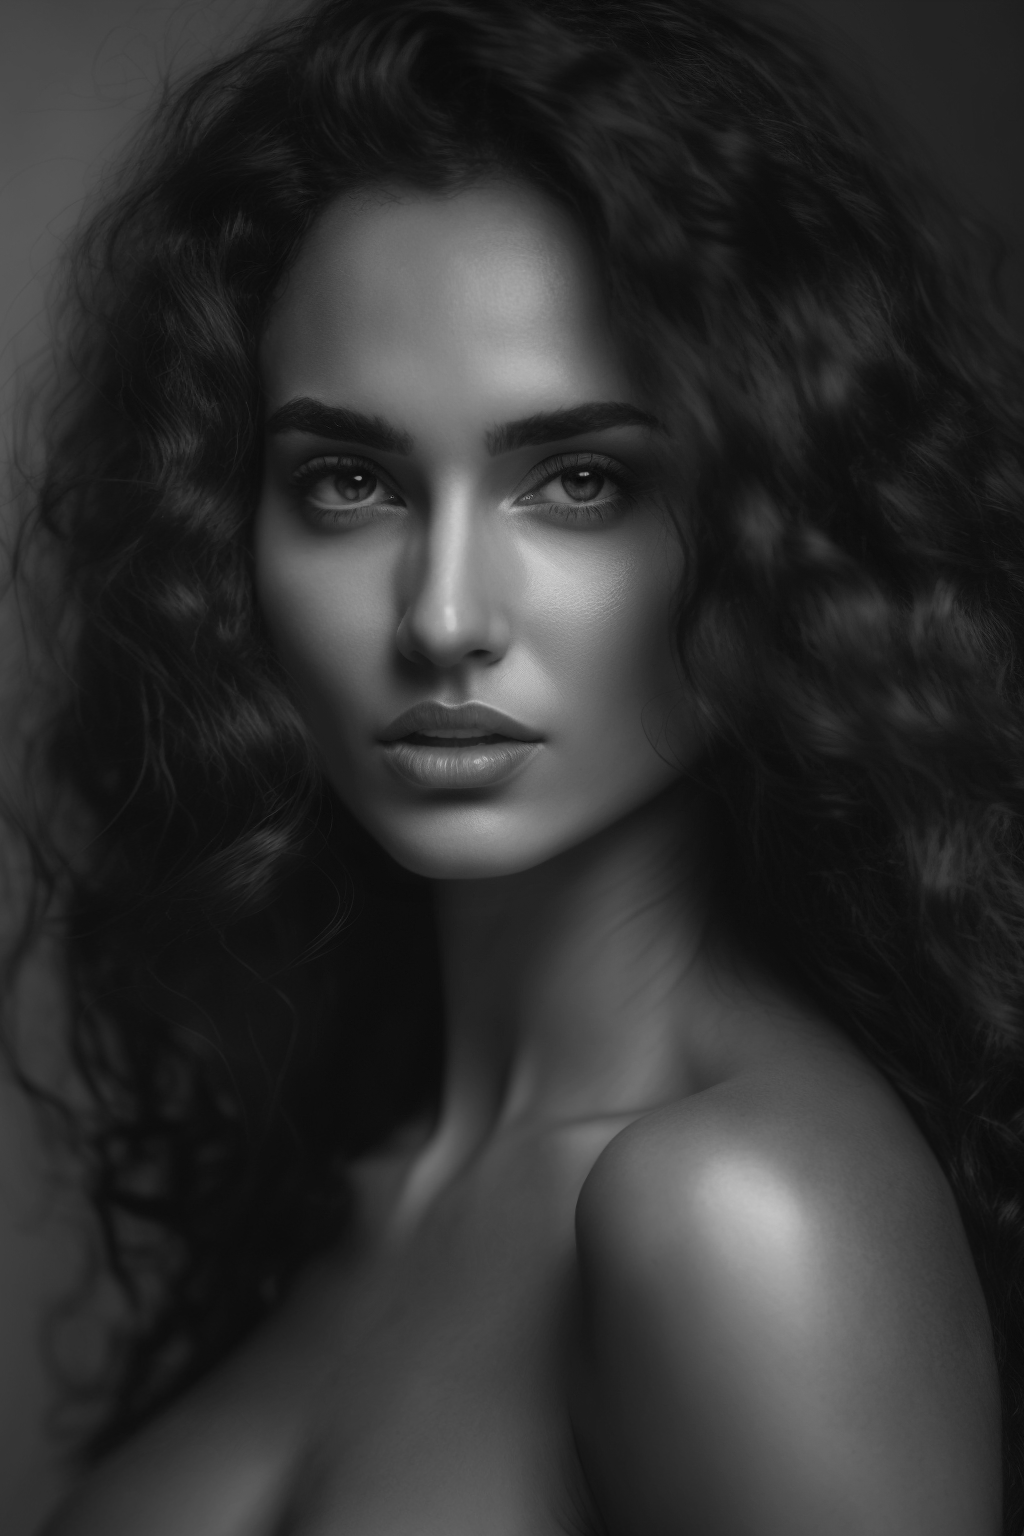 2slmshadee_gorgeous_woman_real_black_and_White_25_years_old_8k_l_8402b1ab-1d61-4d57-9ef0-fa0e0b6e8bb3.png